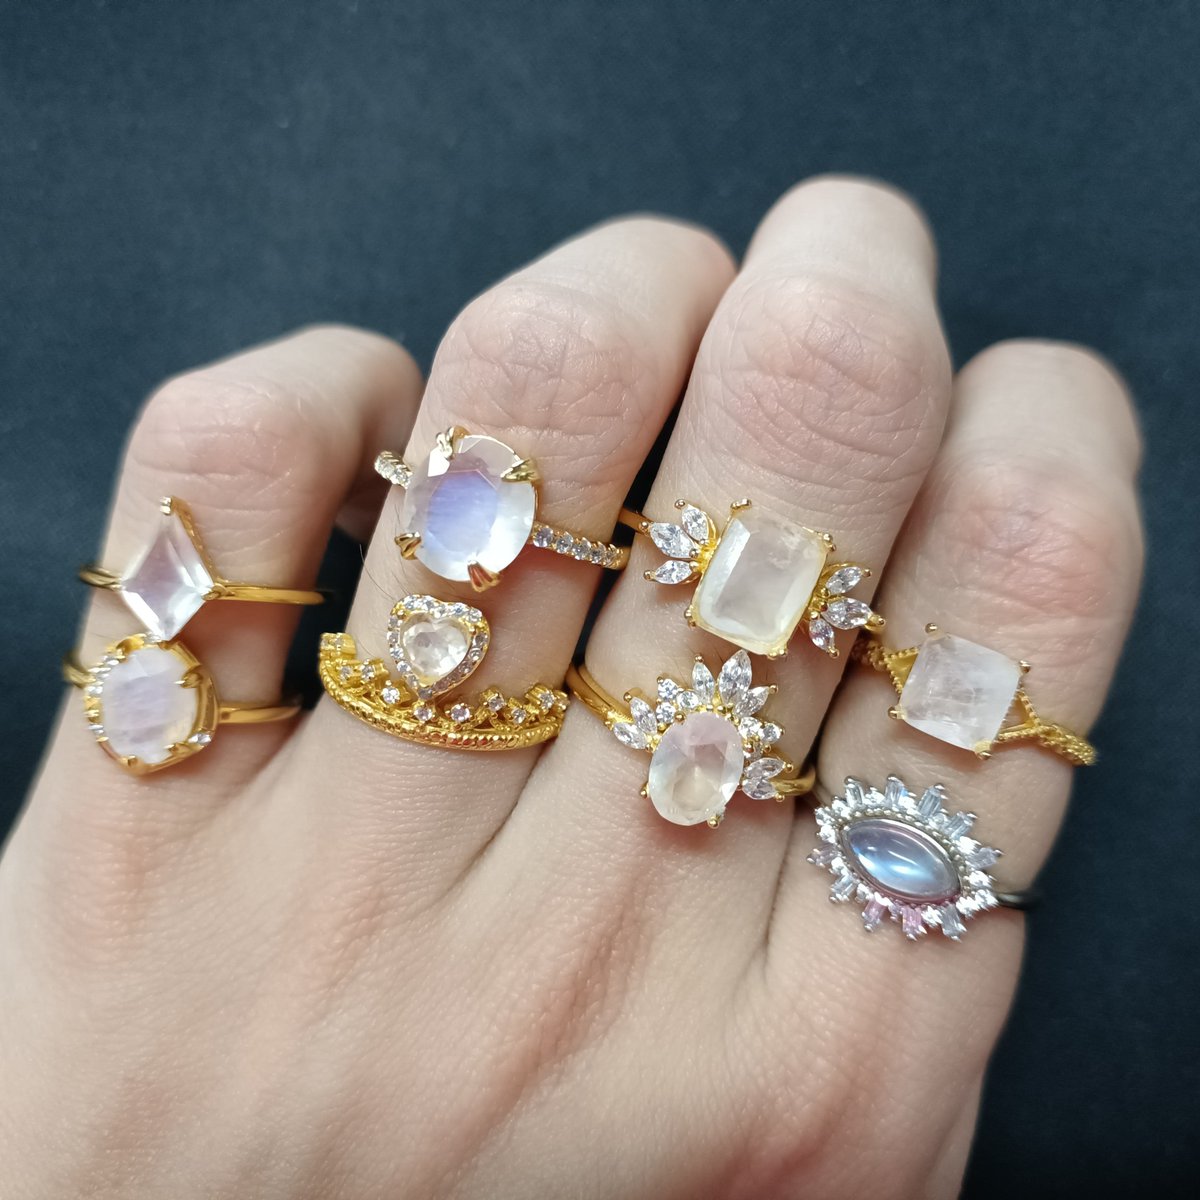 These eight moonstone rings are now available in our store✨
✨sterling silver/ natural moonstones ✨

#moonstonejewelry 
#moonstonering
#moonlight
#moonstone 
#rainbowmoonstone 
#moonlove
#jewelry
#gemstones
#crystalhealing
#handmadejewelry
#crystaljewelry
#crystals